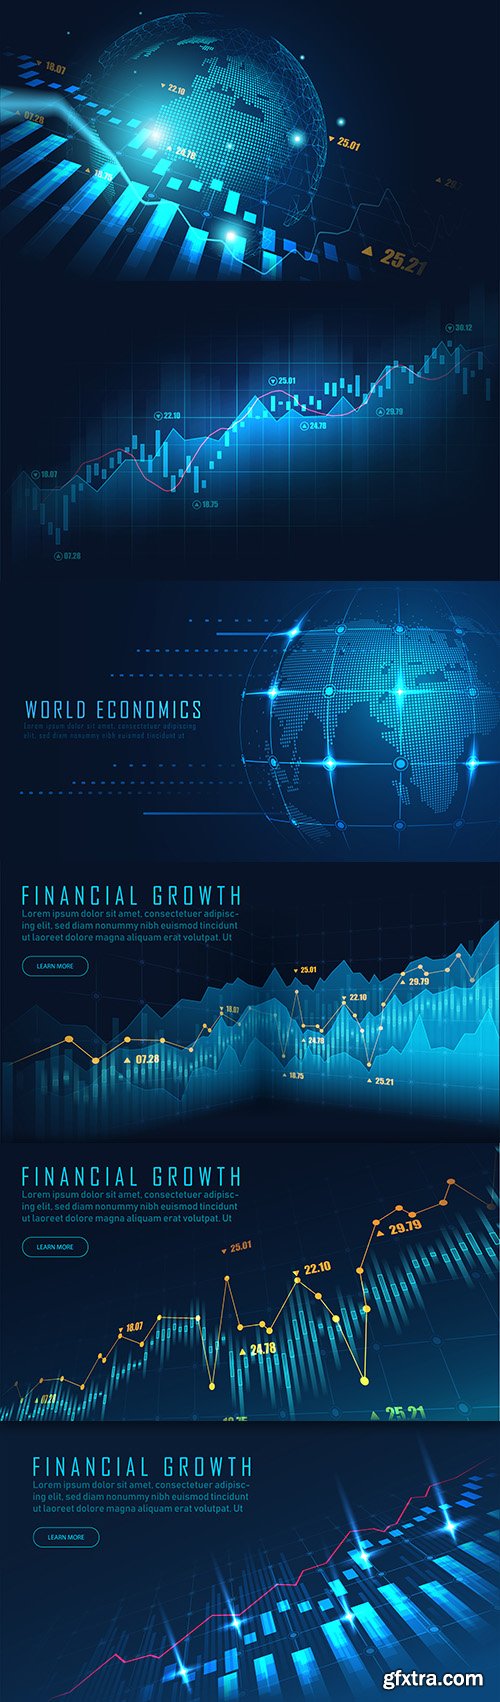 Financial market and trading schedule concept banner